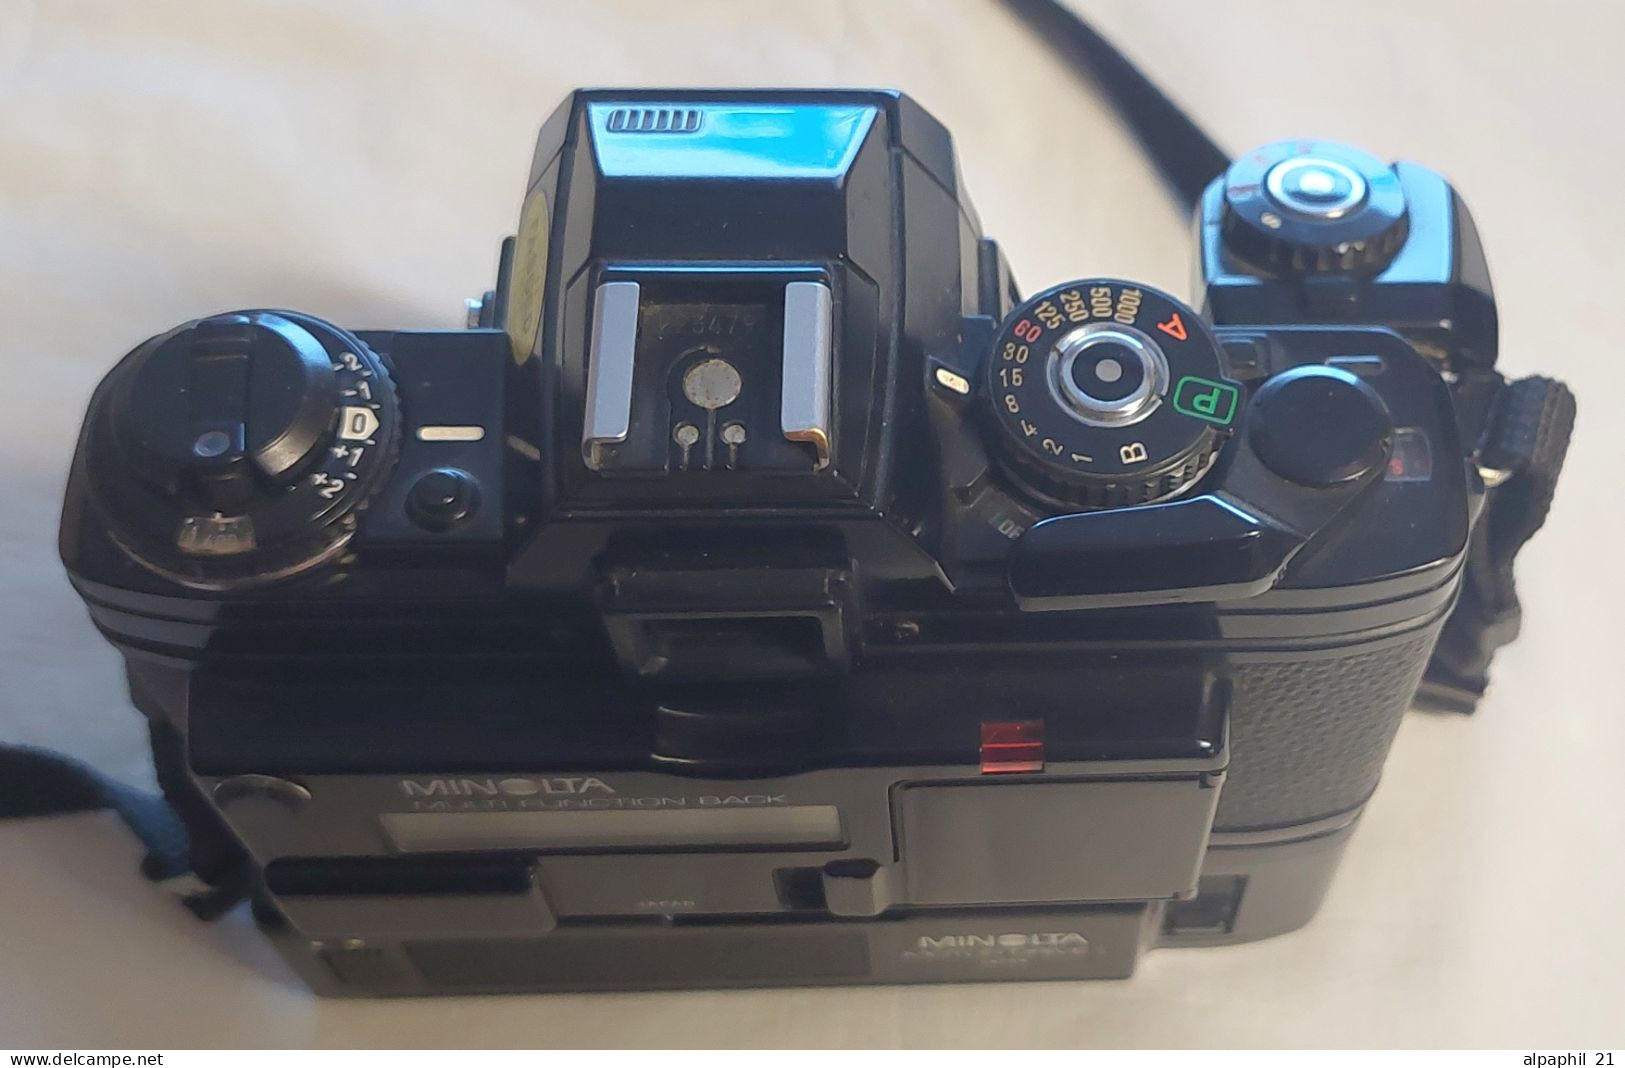 Minolta X-700 With Motor Drive 1 And Lenses - Appareils Photo